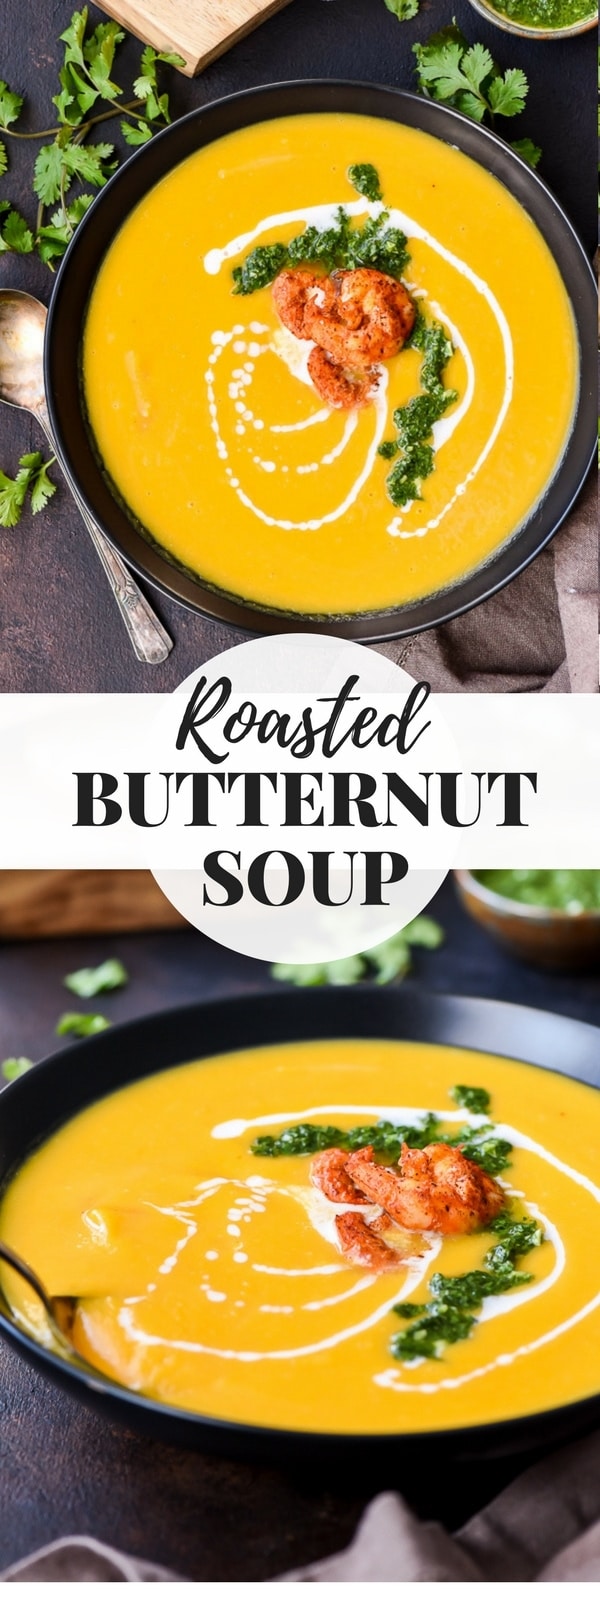 Roasted Butternut Squash Soup with a swirl of coconut milk and green herb sauce on top